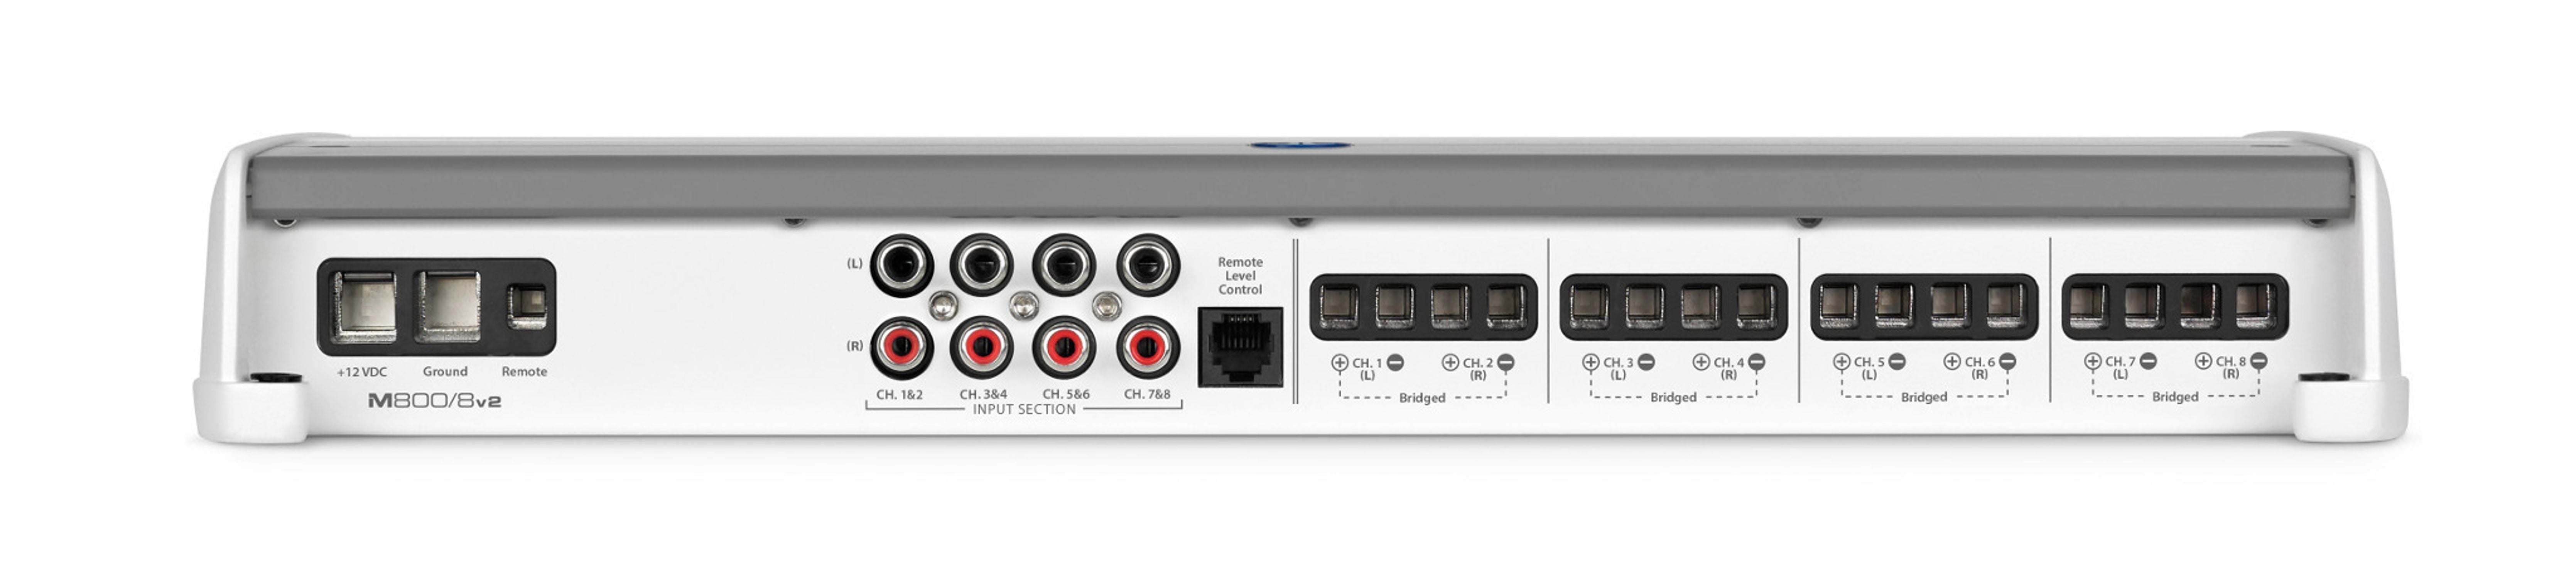 Connection Panel of M800/8v2 Amplifier with Control Panel Cover on